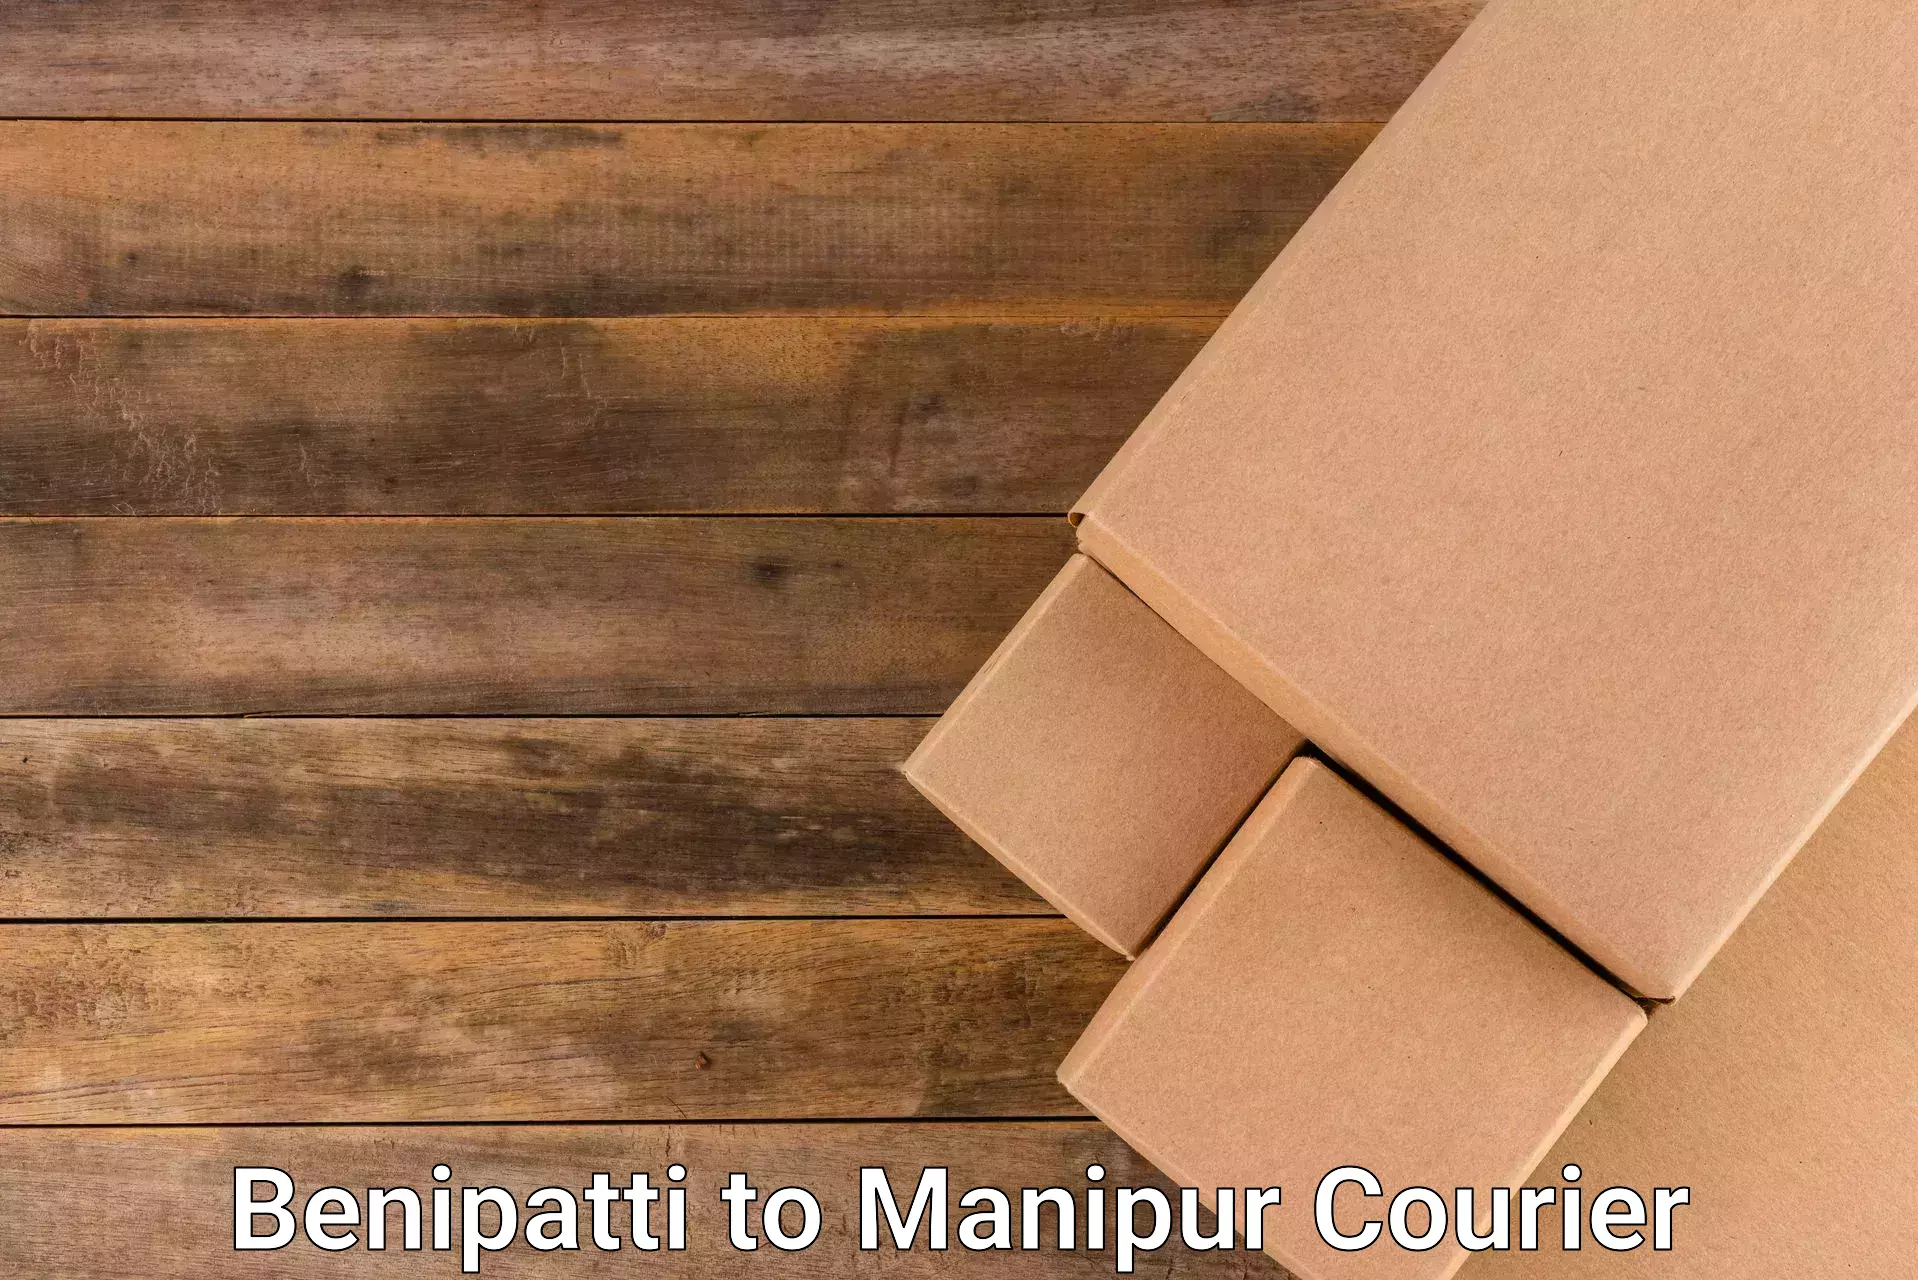 User-friendly courier app Benipatti to Manipur